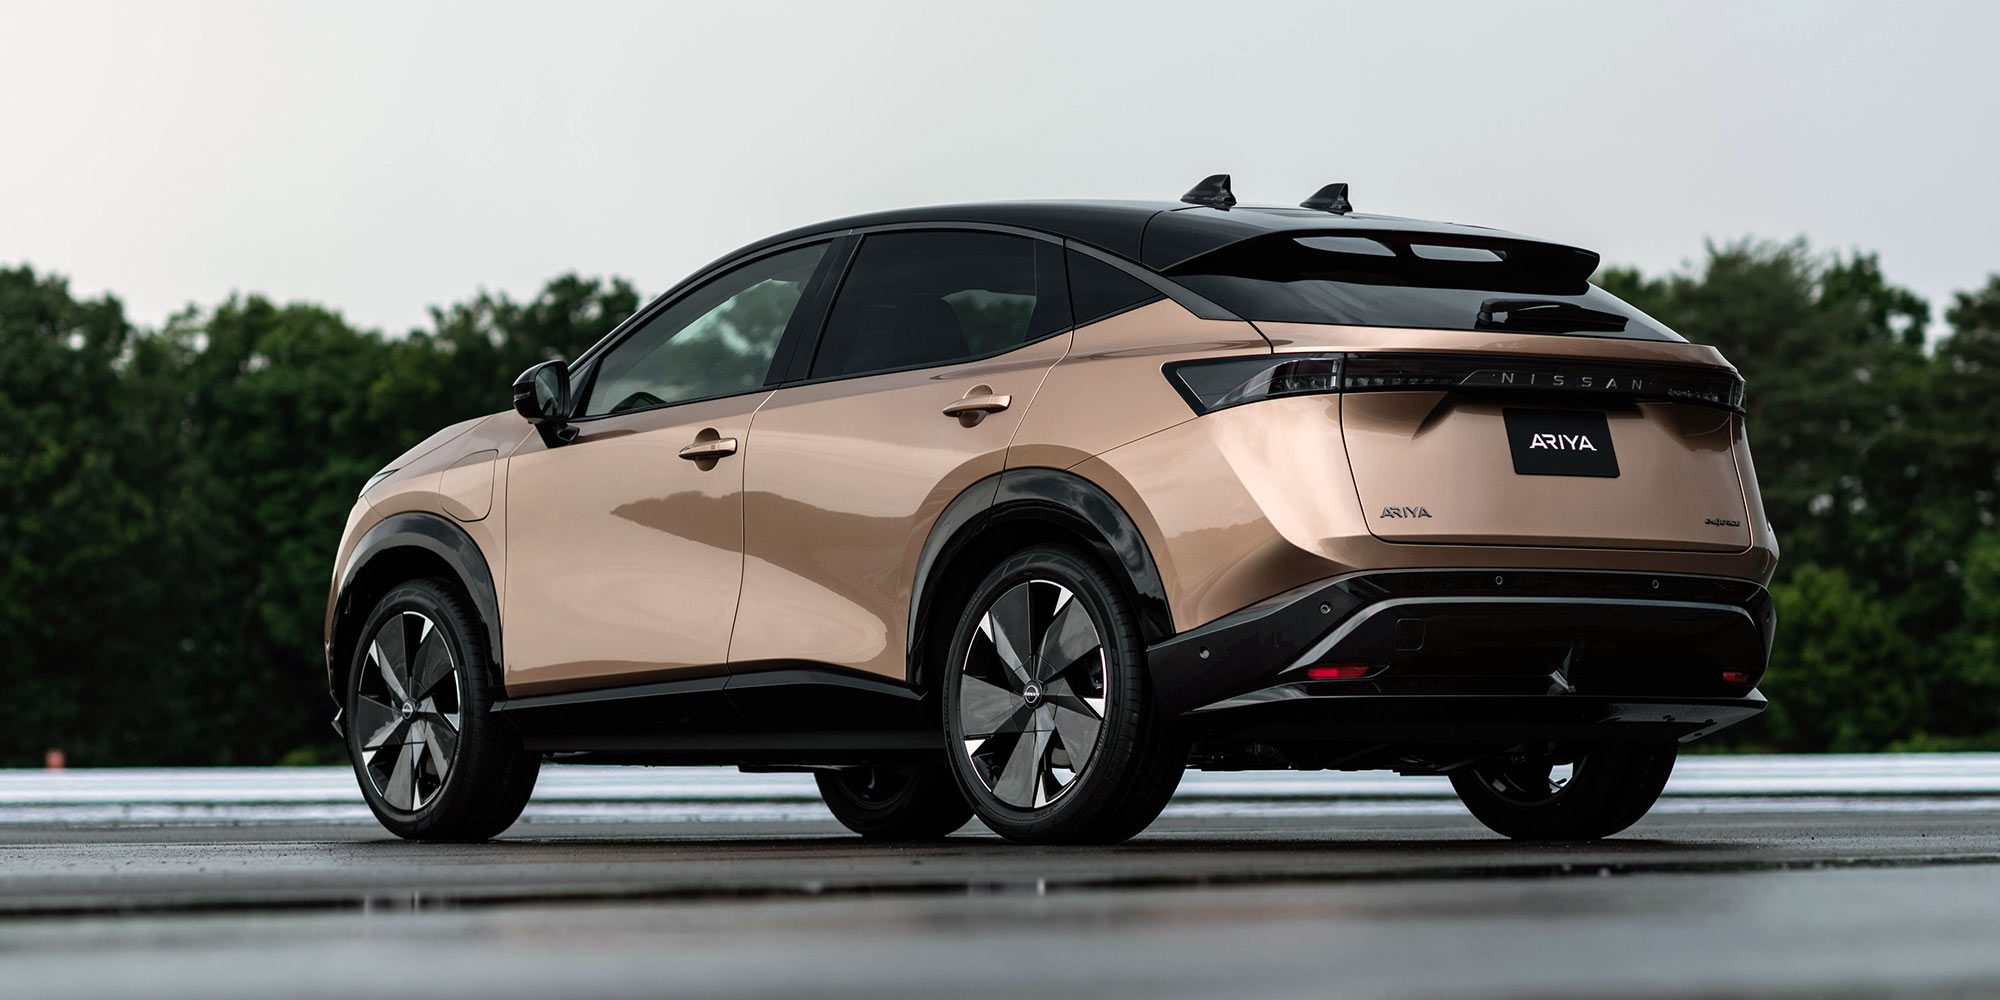 2022 Nissan Ariya Pricing, Review, and Specs - Wallace Nissan Blog